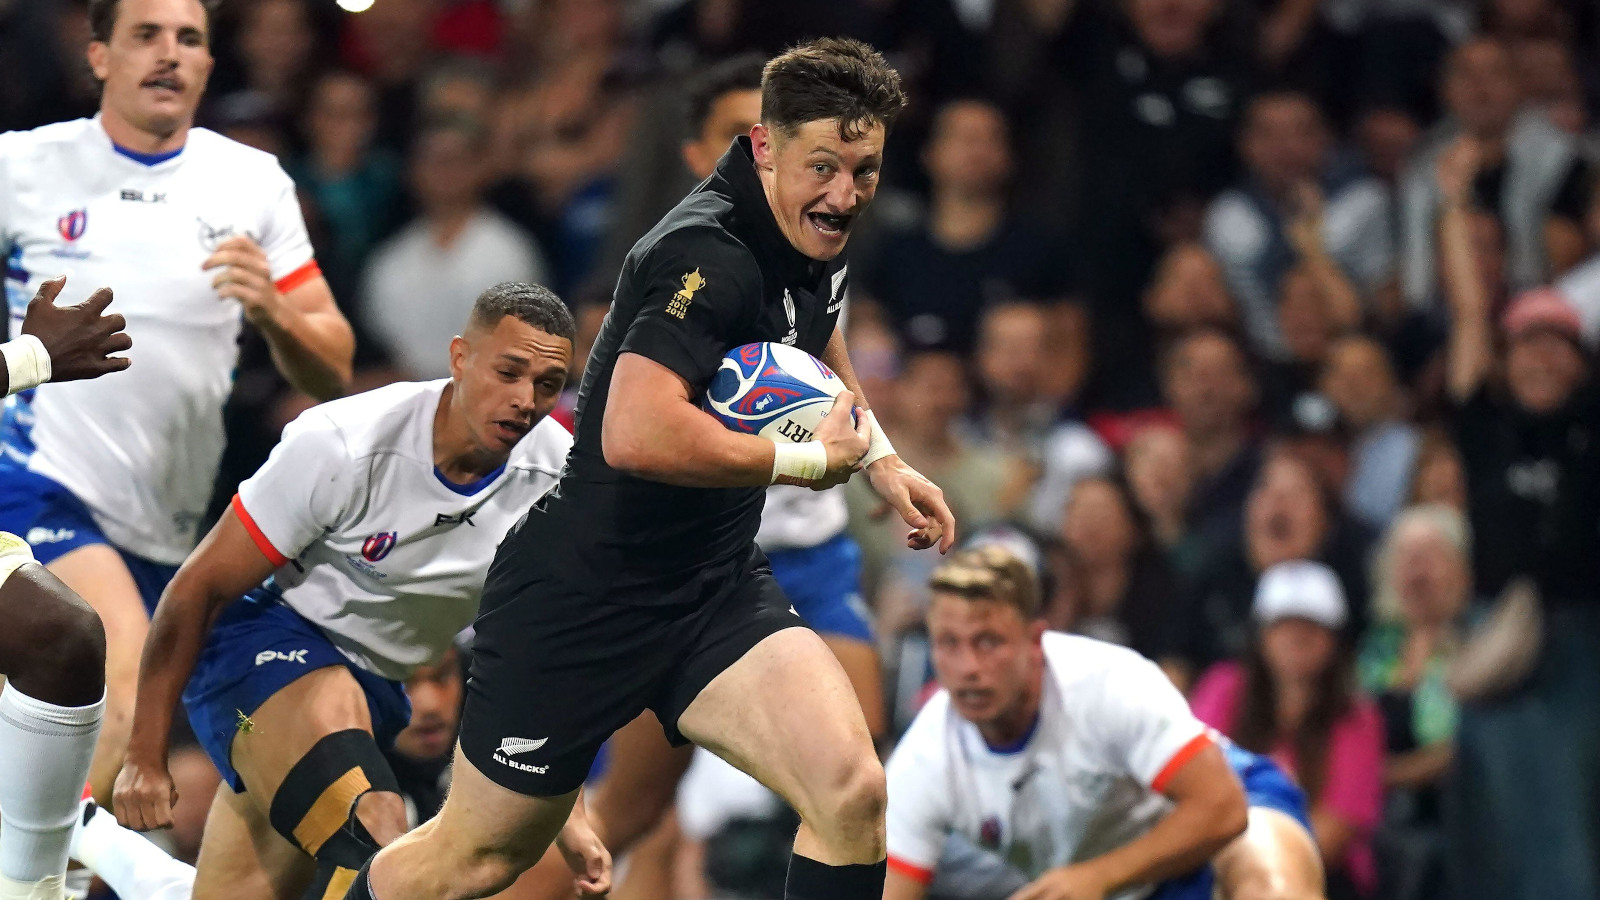 The All Blacks Match with Namibia Was Rated Higher than France, But it is Hard to Compare Due to the Teams' Rankings